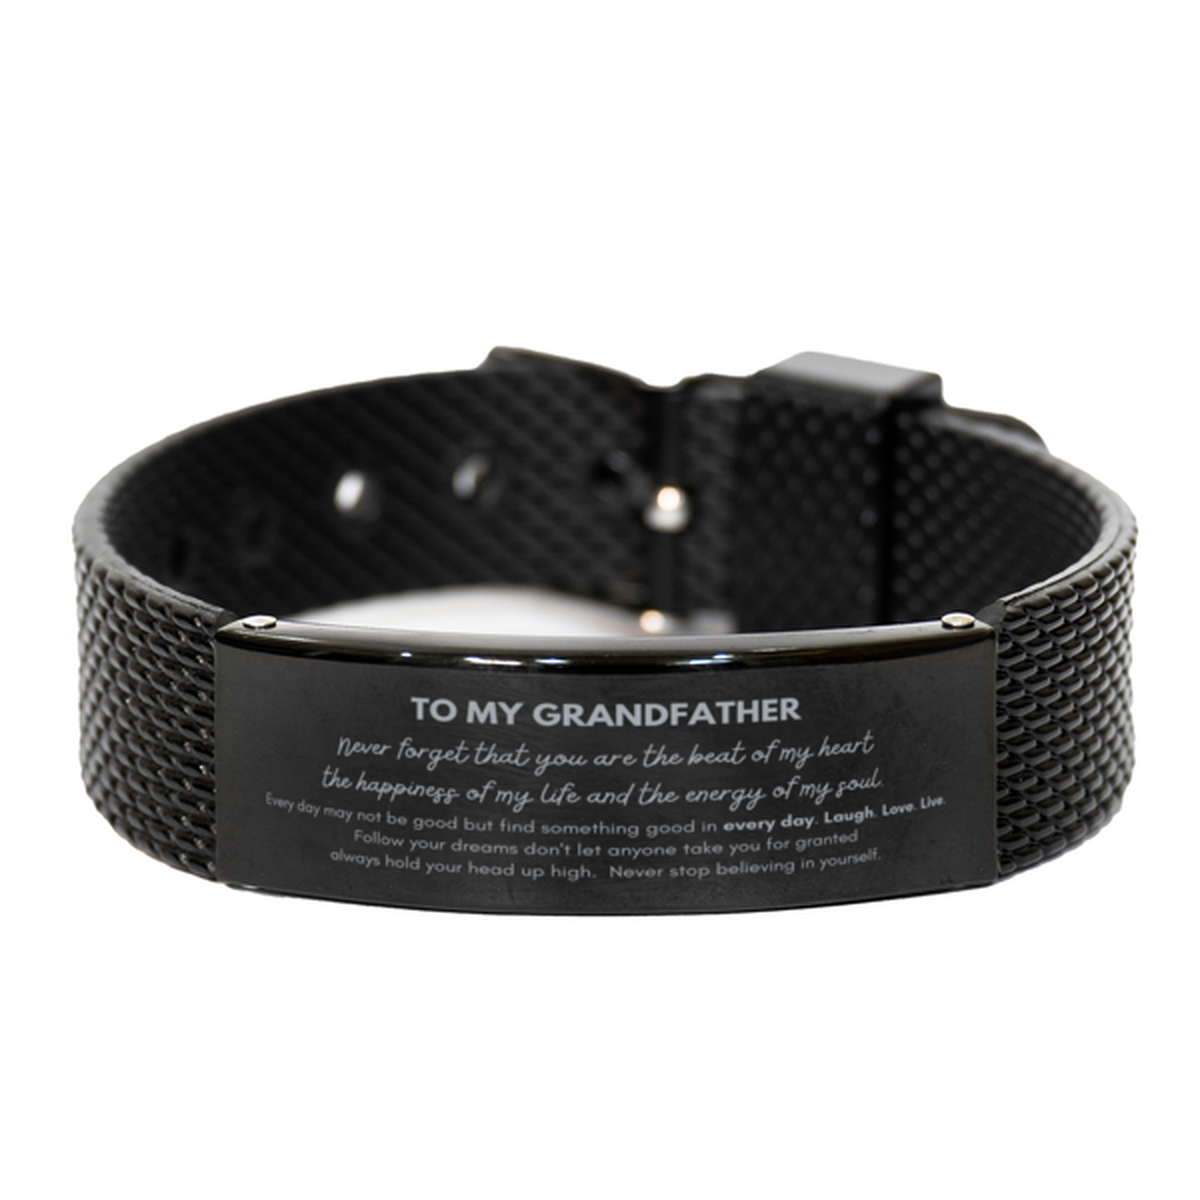 To My Grandfather Bracelet Gifts, Christmas Grandfather Black Shark Mesh Bracelet Present, Birthday Unique Motivational For Grandfather, To My Grandfather Never forget that you are the beat of my heart the happiness of my life and the energy of my soul